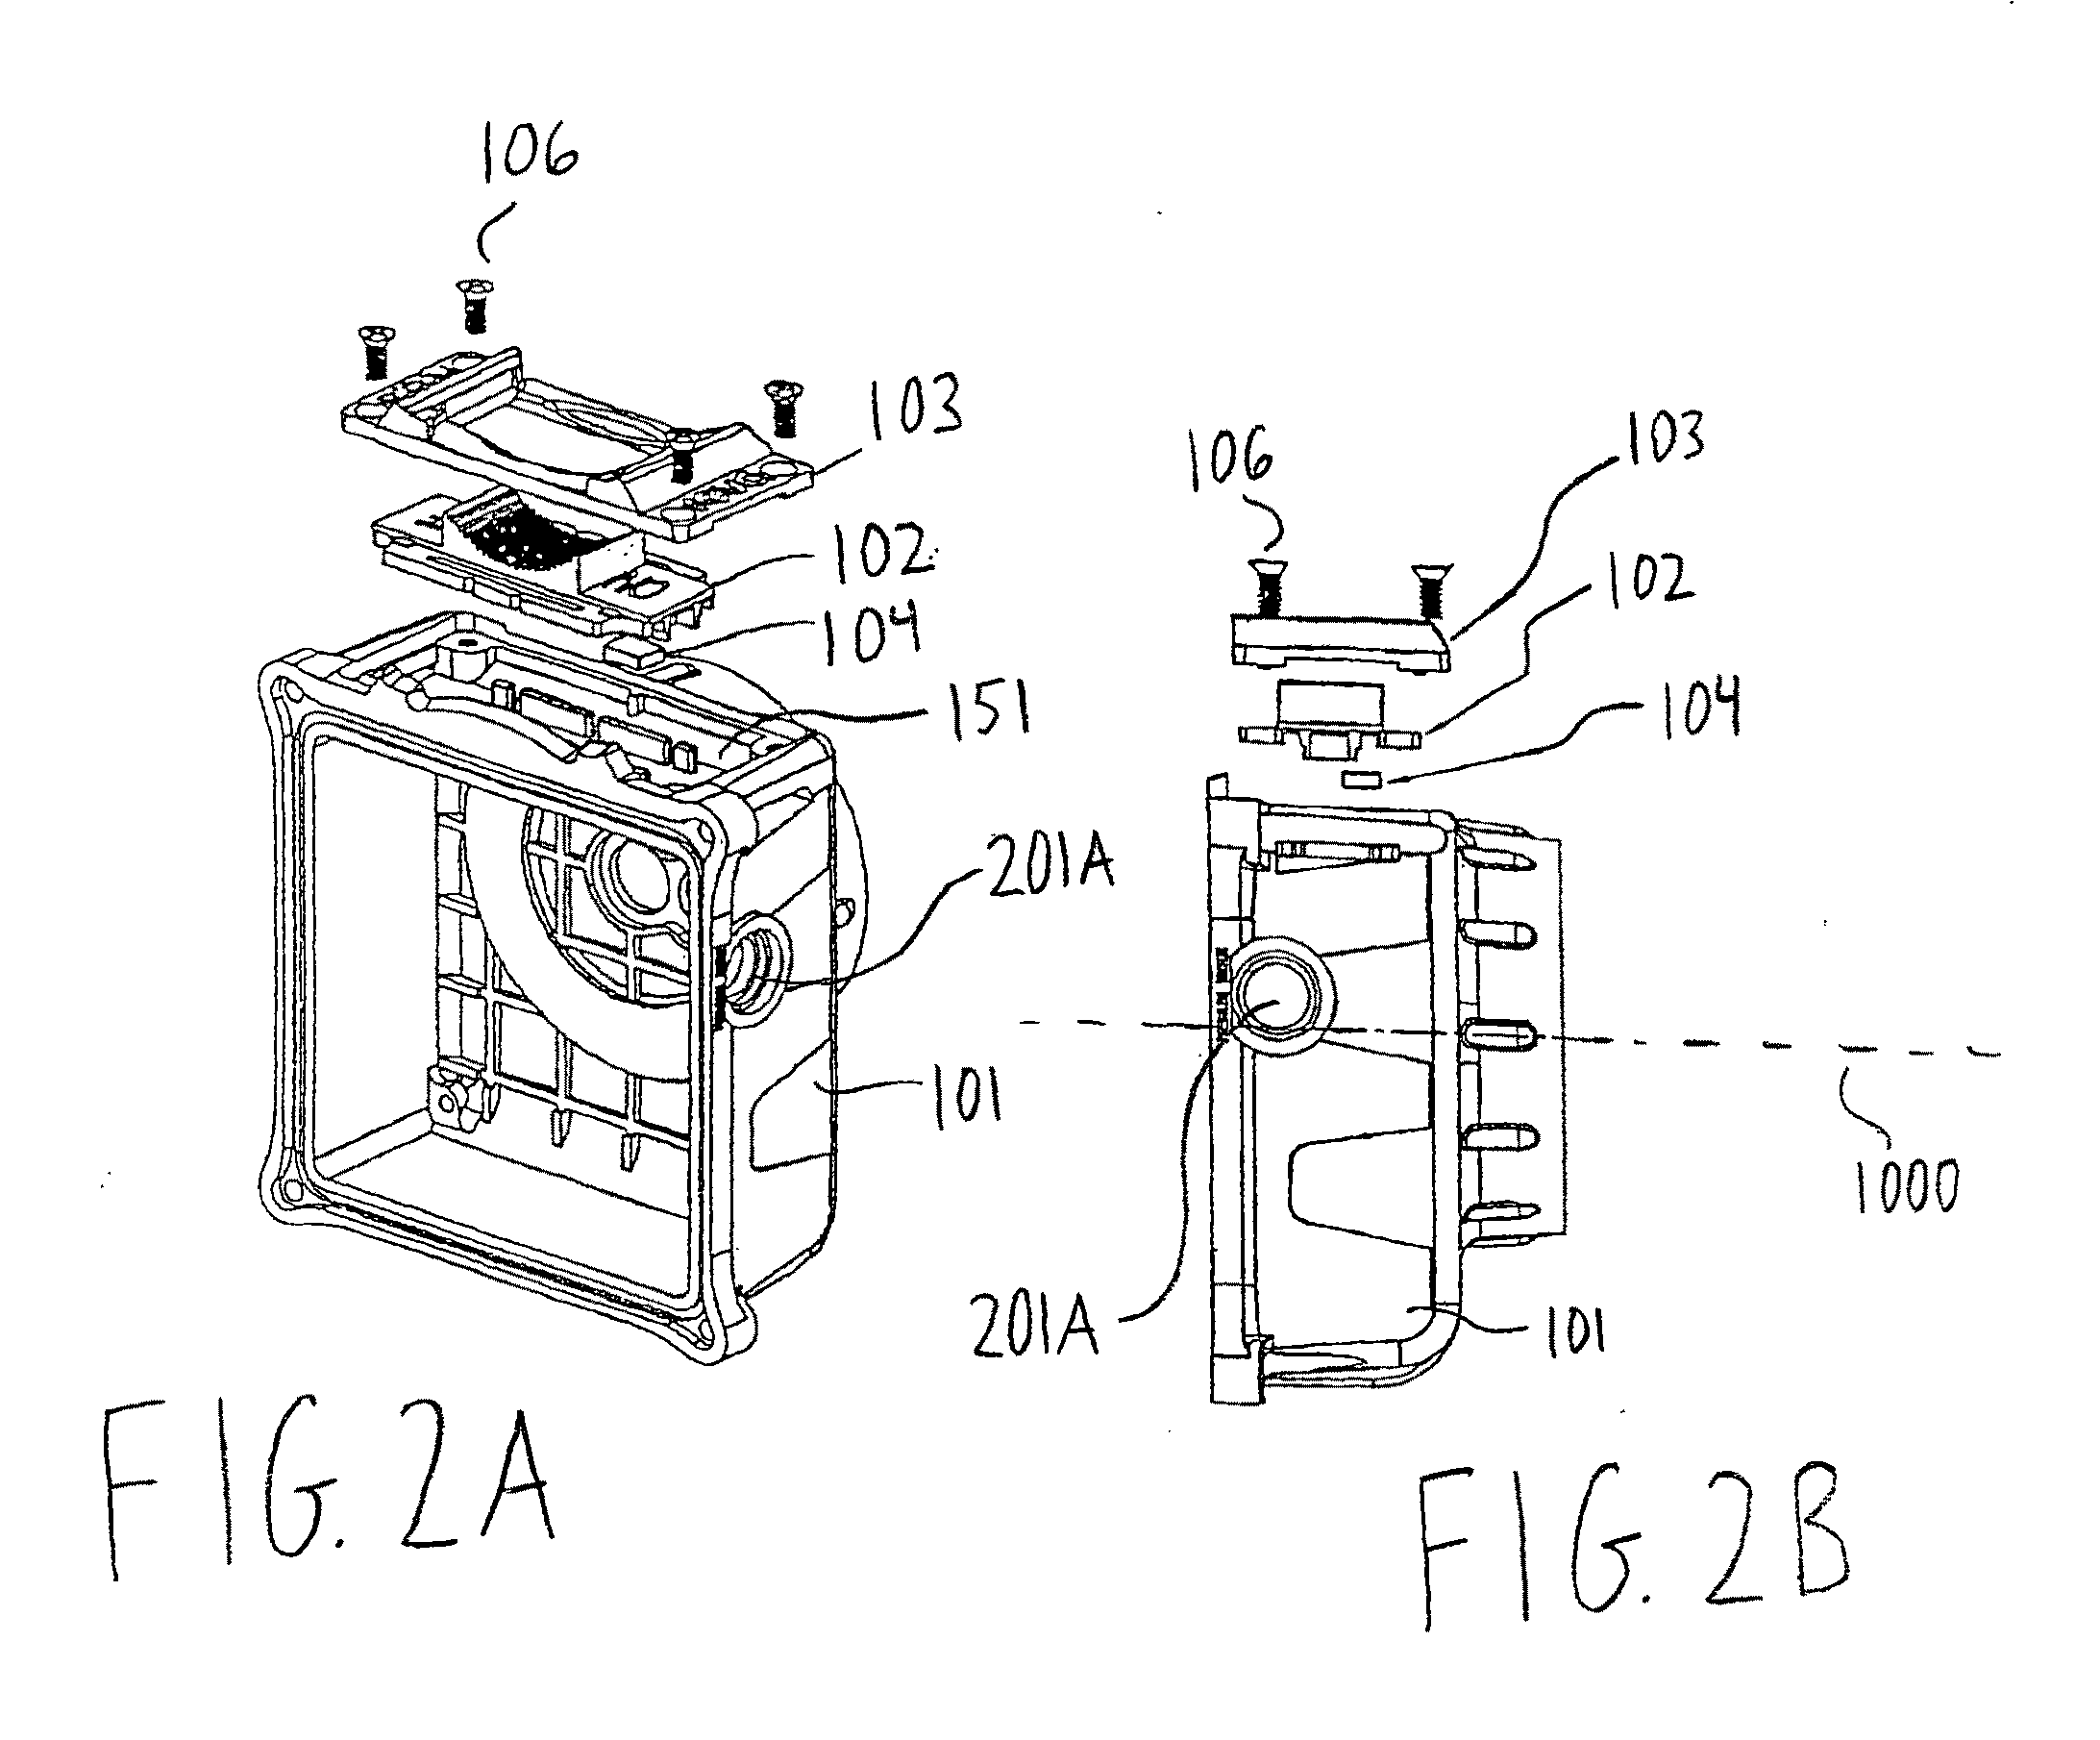 Reed and pressure switching system for use in a lighting system